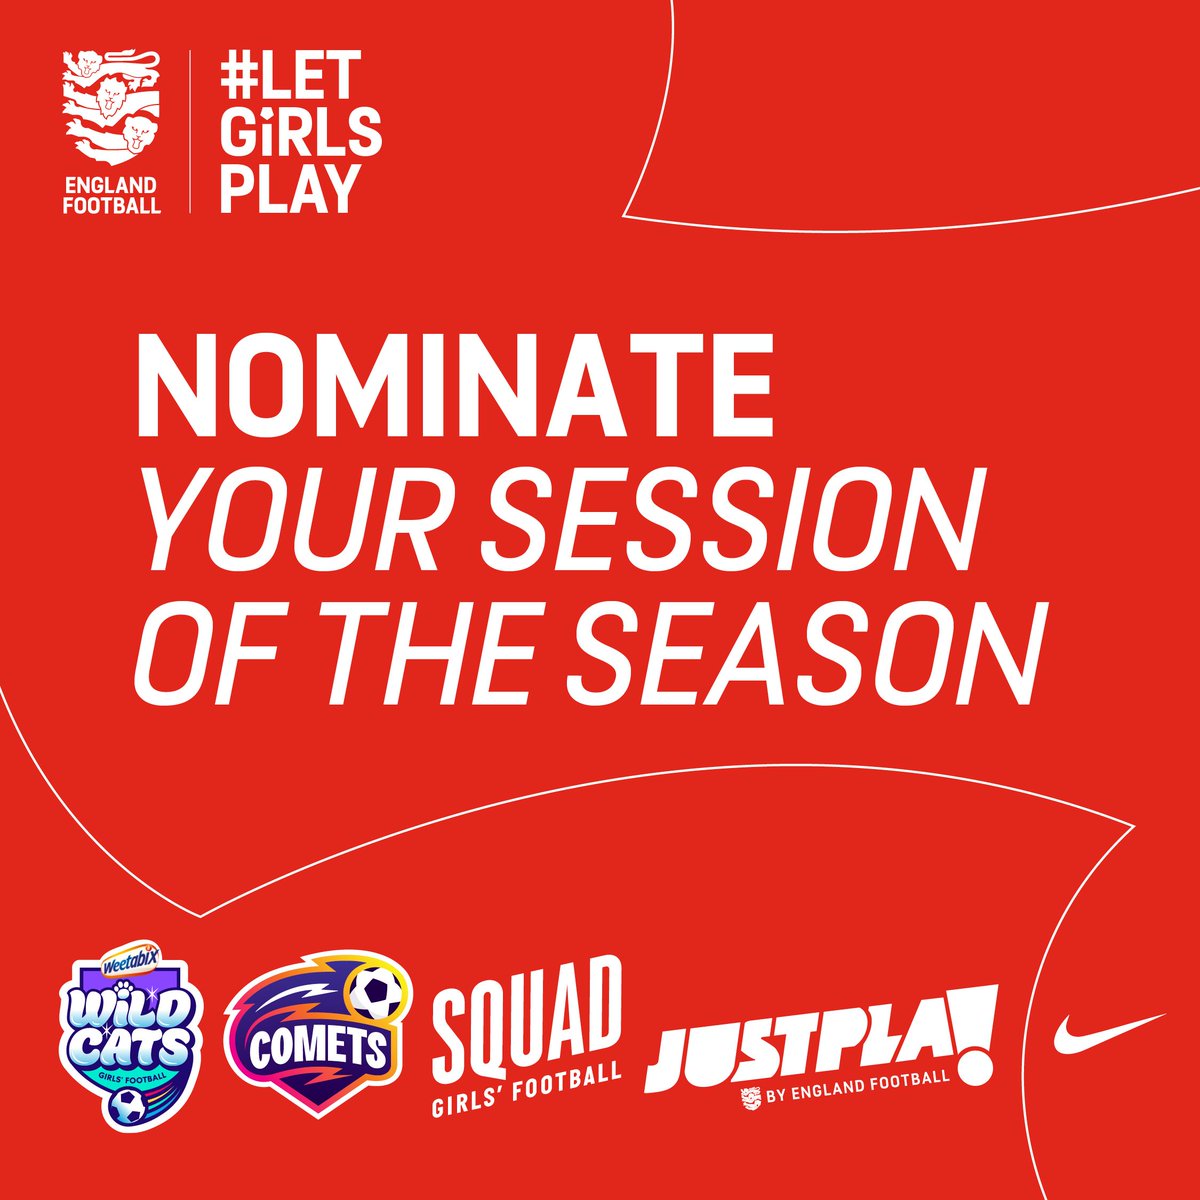 Time is running out to nominate your Session of the Season! Give a Weetabix Wildcats, Comets, Squad Girls' Football or Just Play session the recognition it deserves. Nominate now ⬇️ buff.ly/3TQoJIc Nominations close 5pm on Friday 17th May.